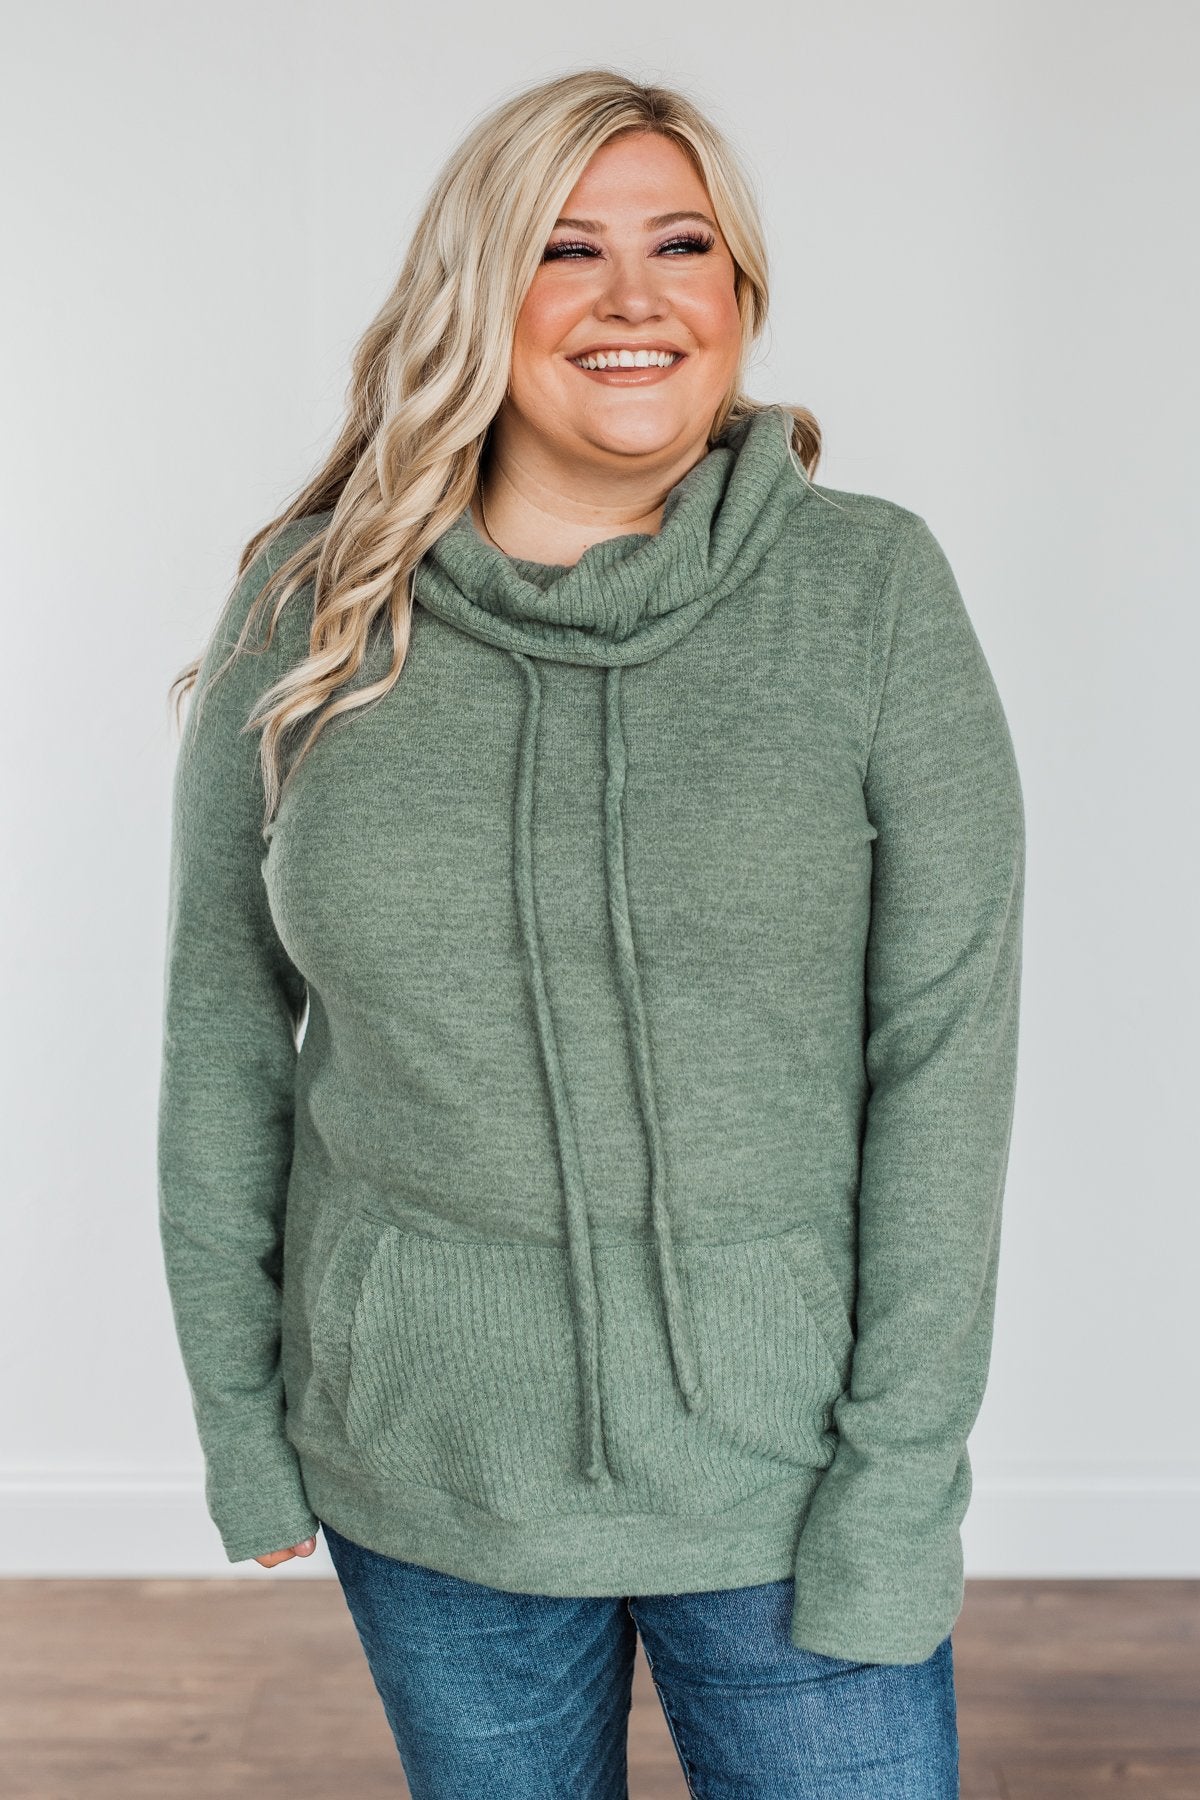 Searching For You Cowl Neck Top- Sage